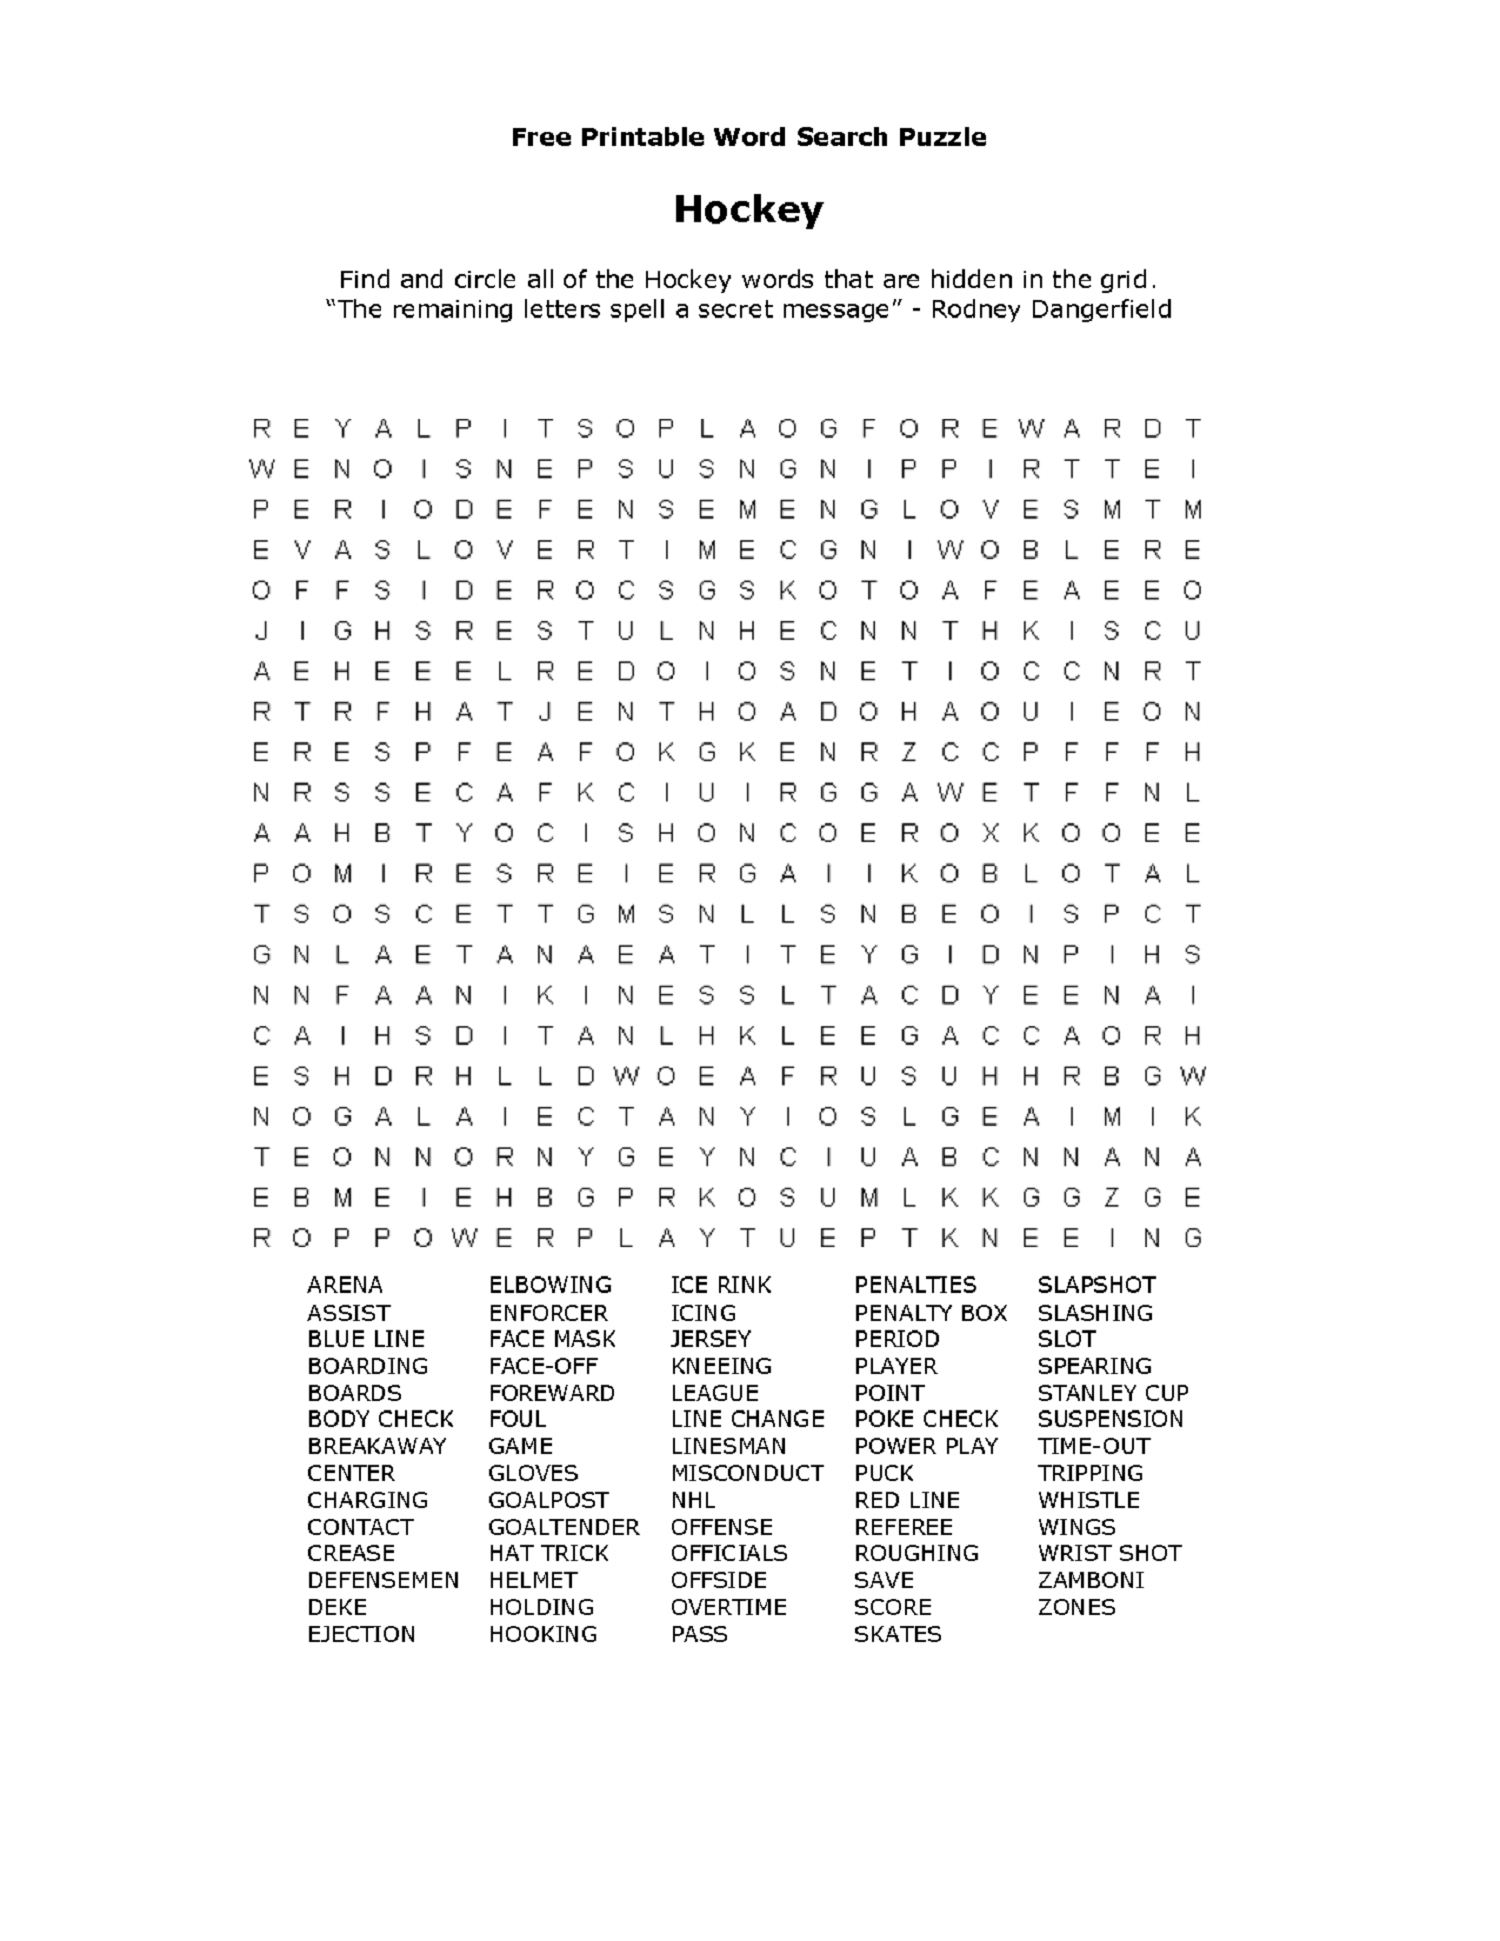 Printable Puzzles And Word Games | Printable Crossword Puzzles